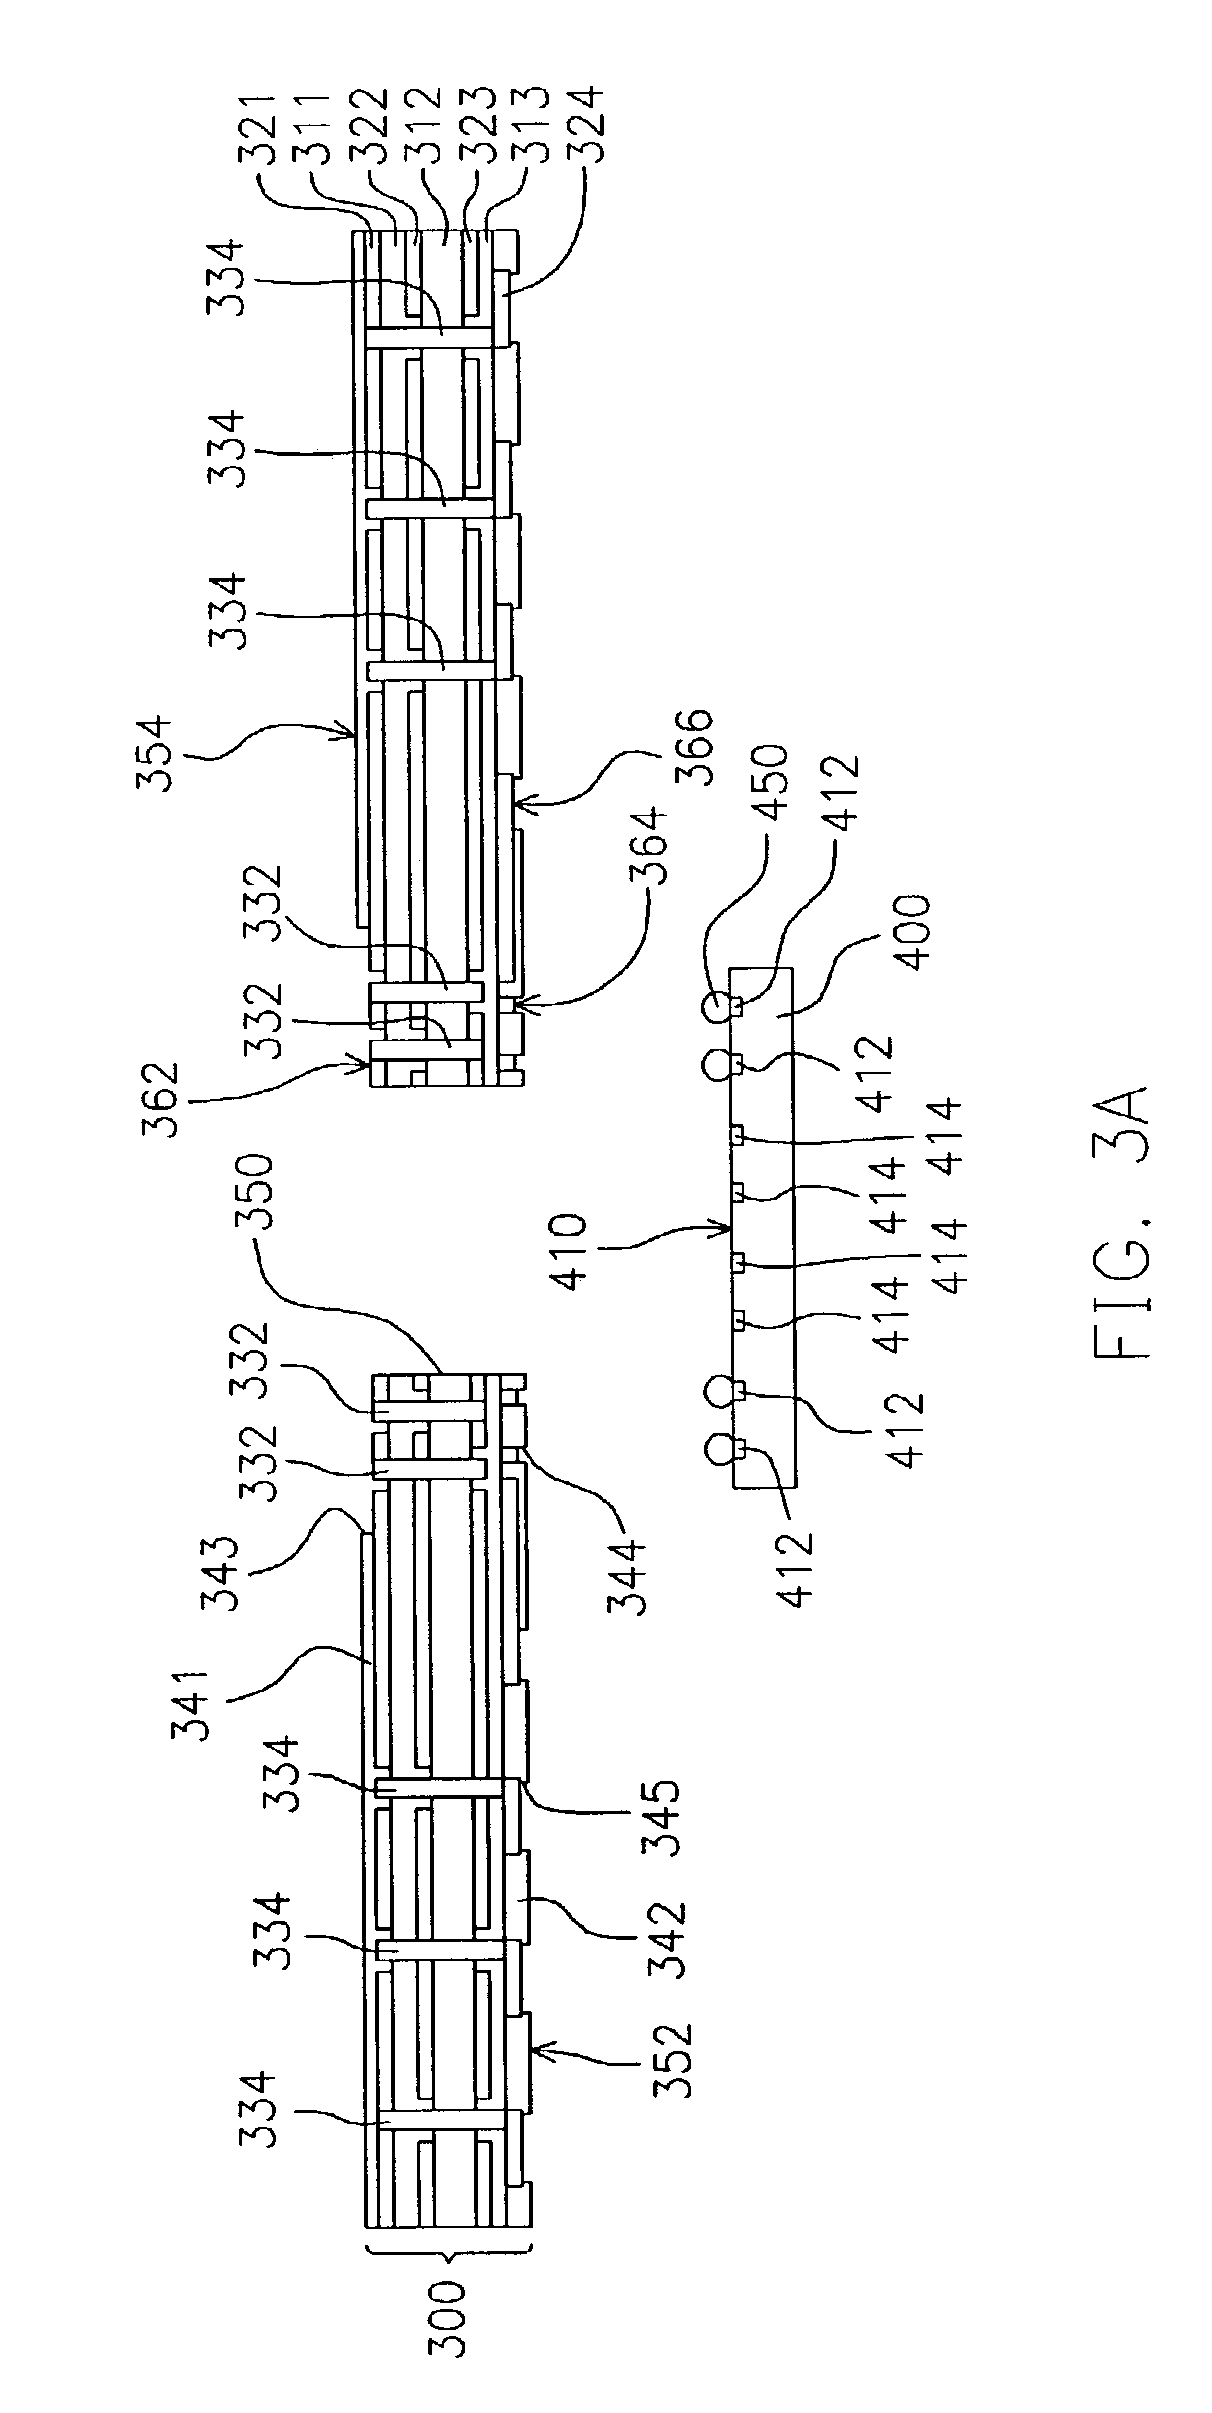 Chip package and process for forming the same